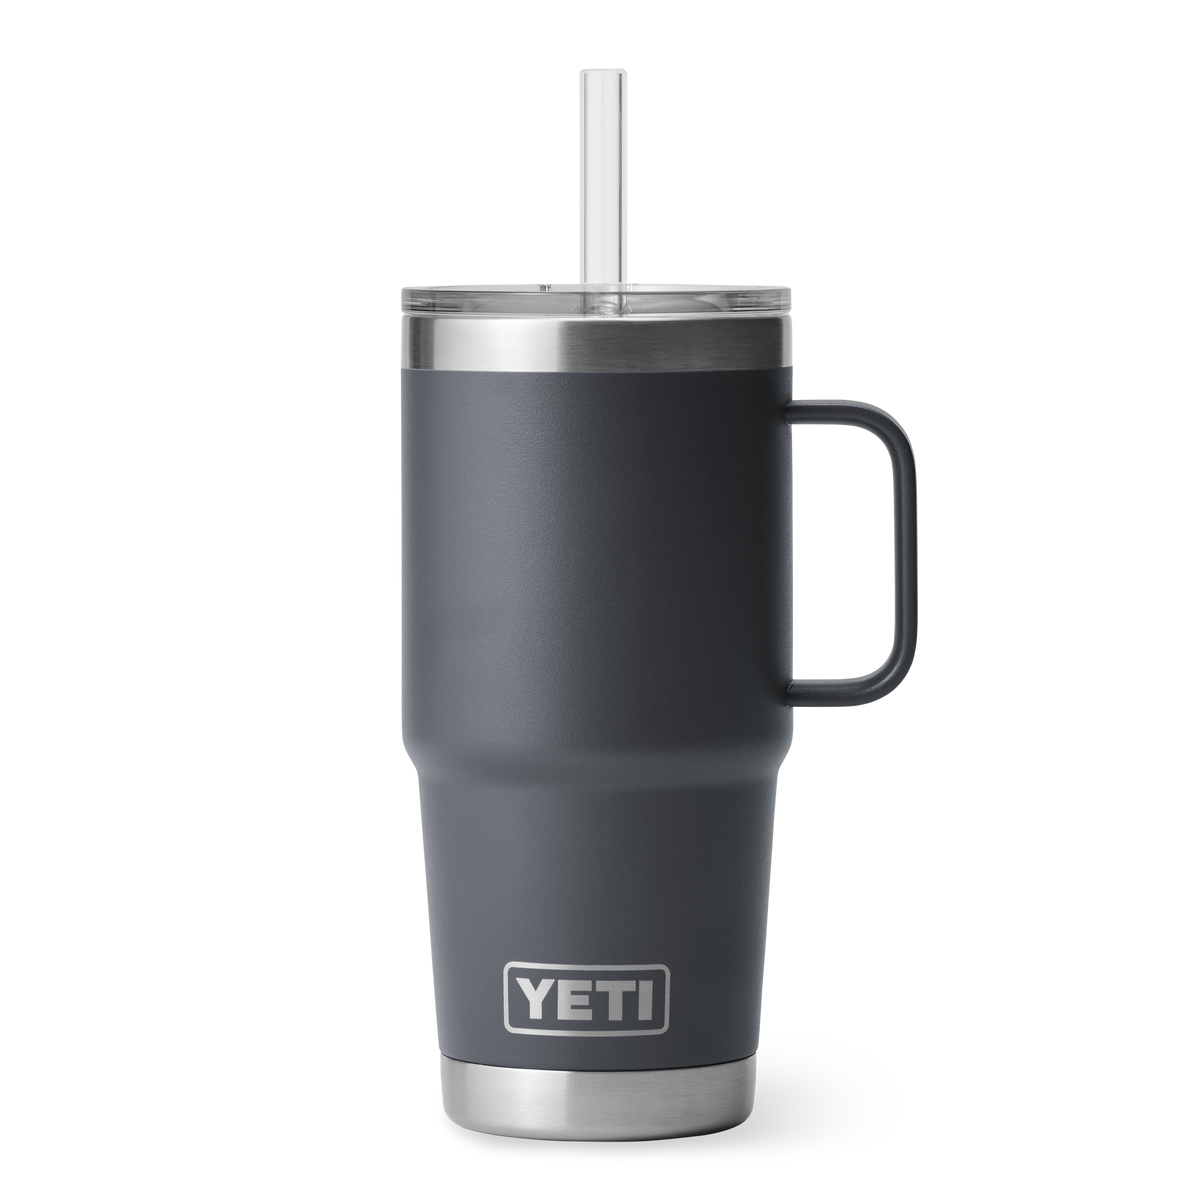 Yeti Rambler 25oz Mug With Straw Lid - Charcoal – Luxe Barbeque 